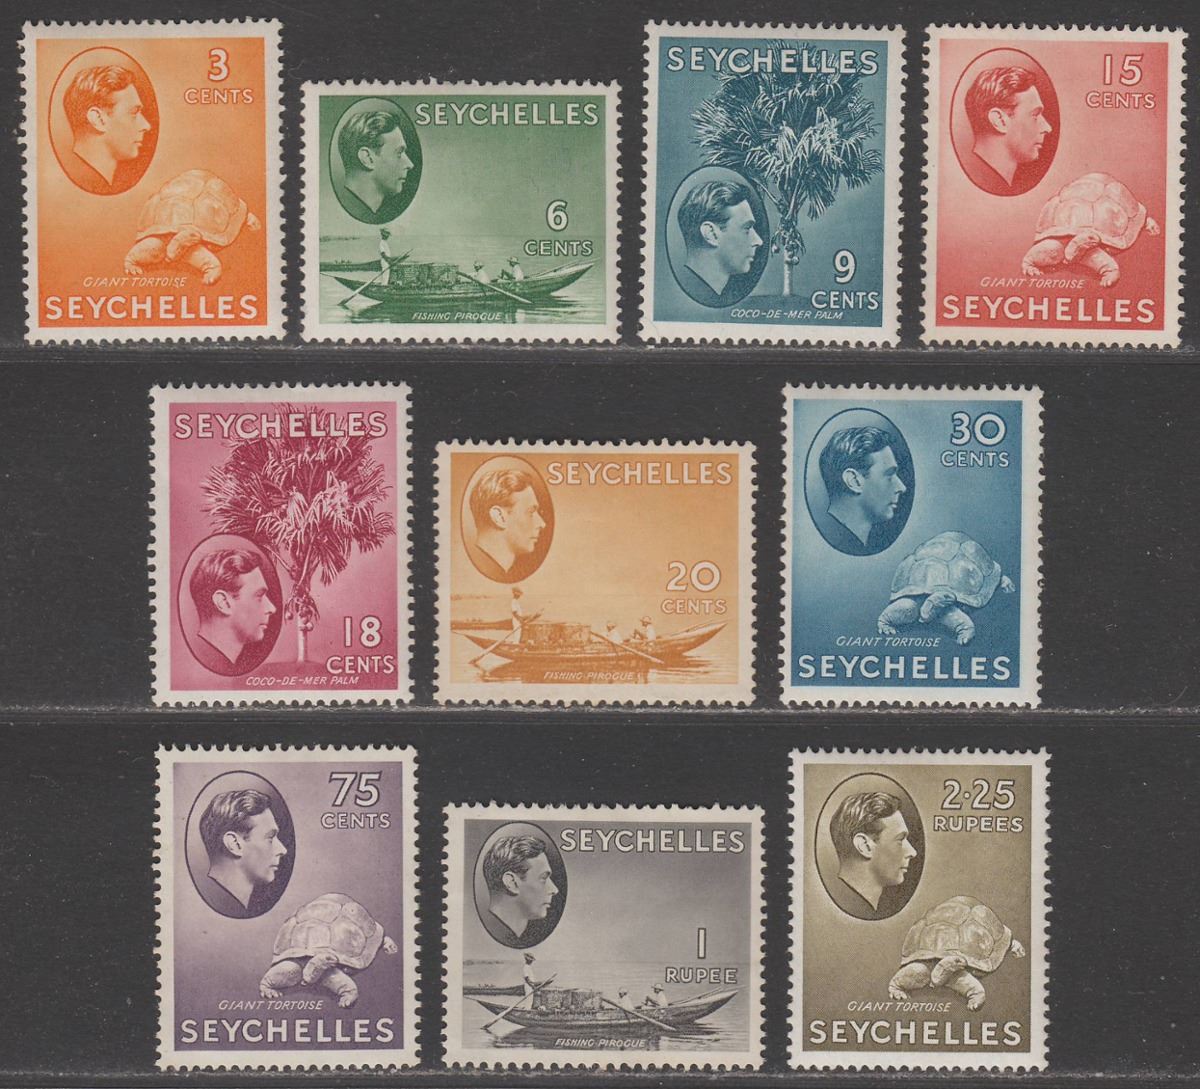 Seychelles 1938 King George VI Part Set to 2r.25 Mint / Unused mostly chalky